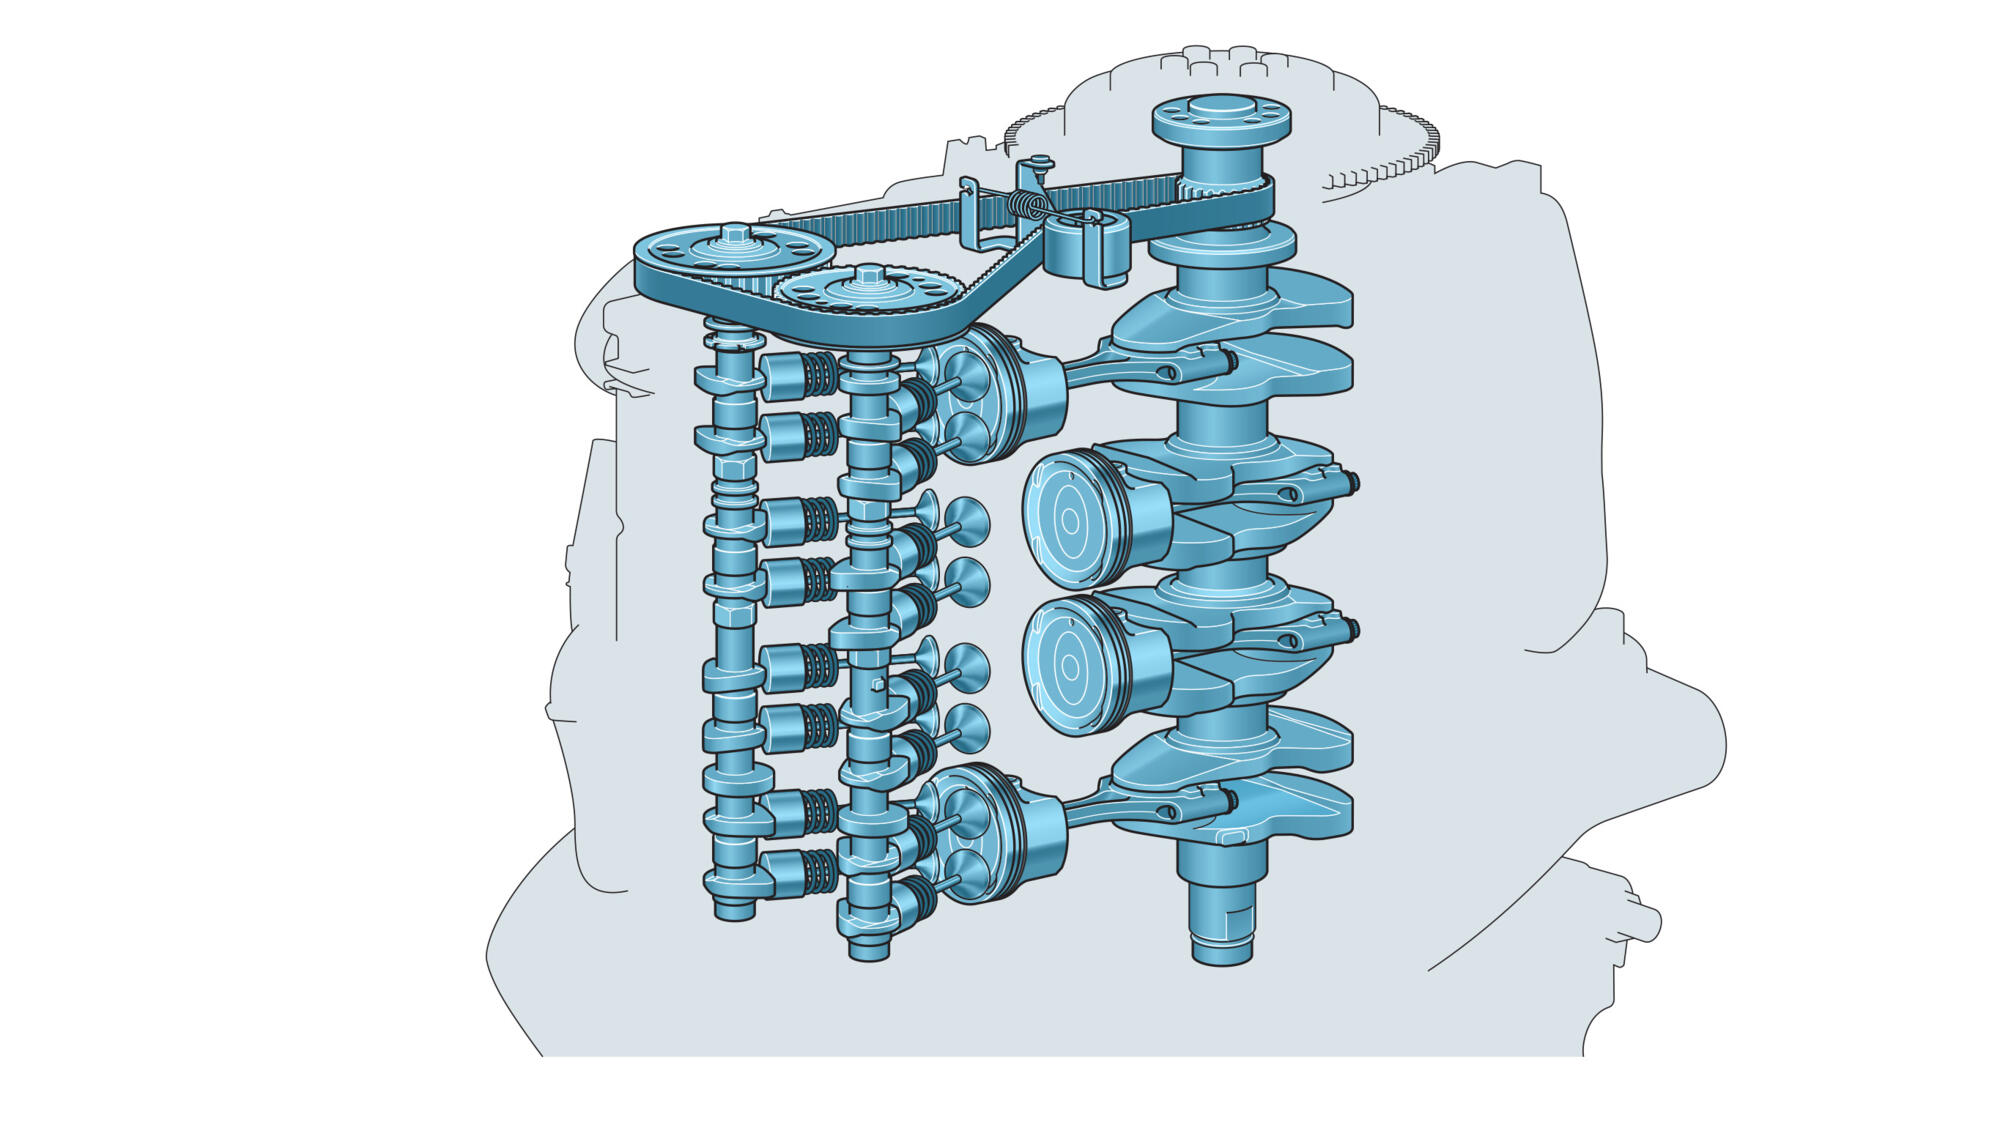 Double Overhead Camshaft with Four Valves Per Cylinder